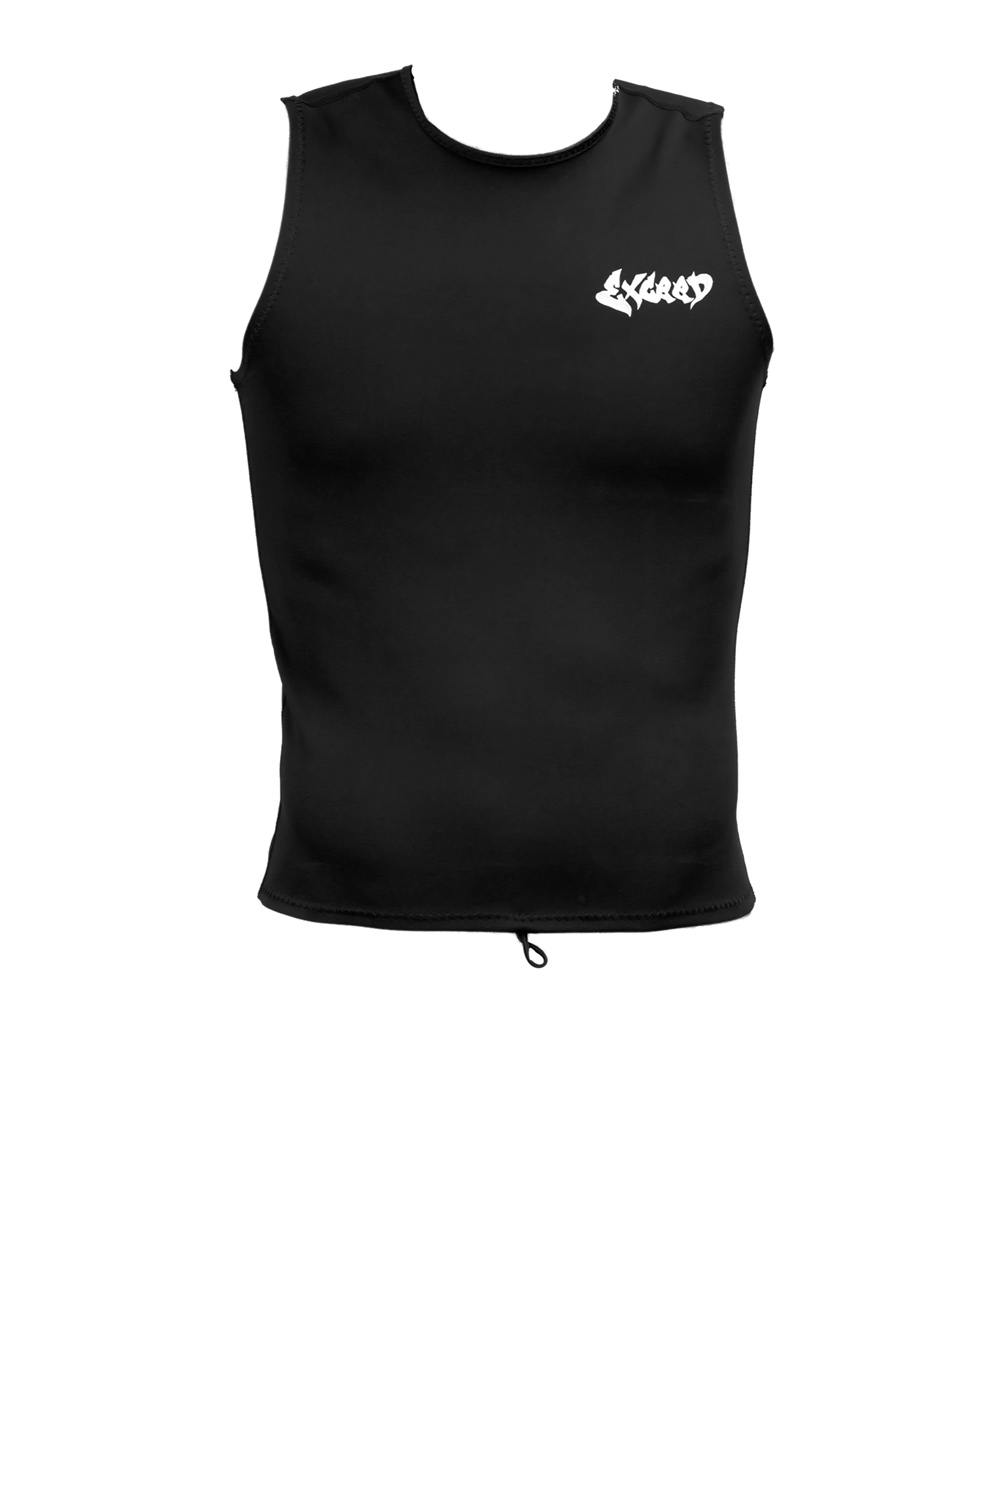 Exceed Endless Mens Sleeveless 3mm Vest